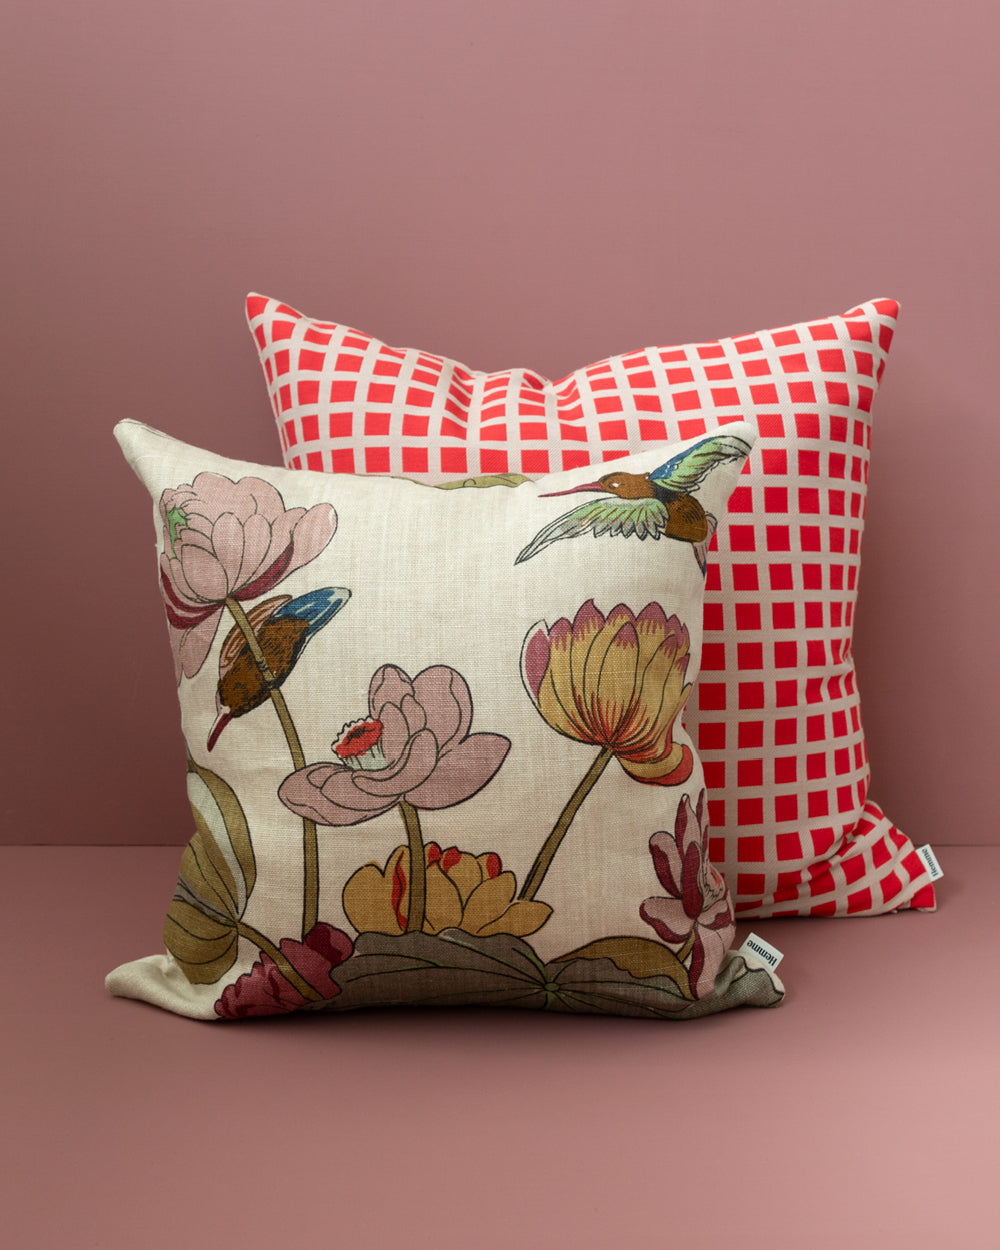 Remi Pillow Cover, Red